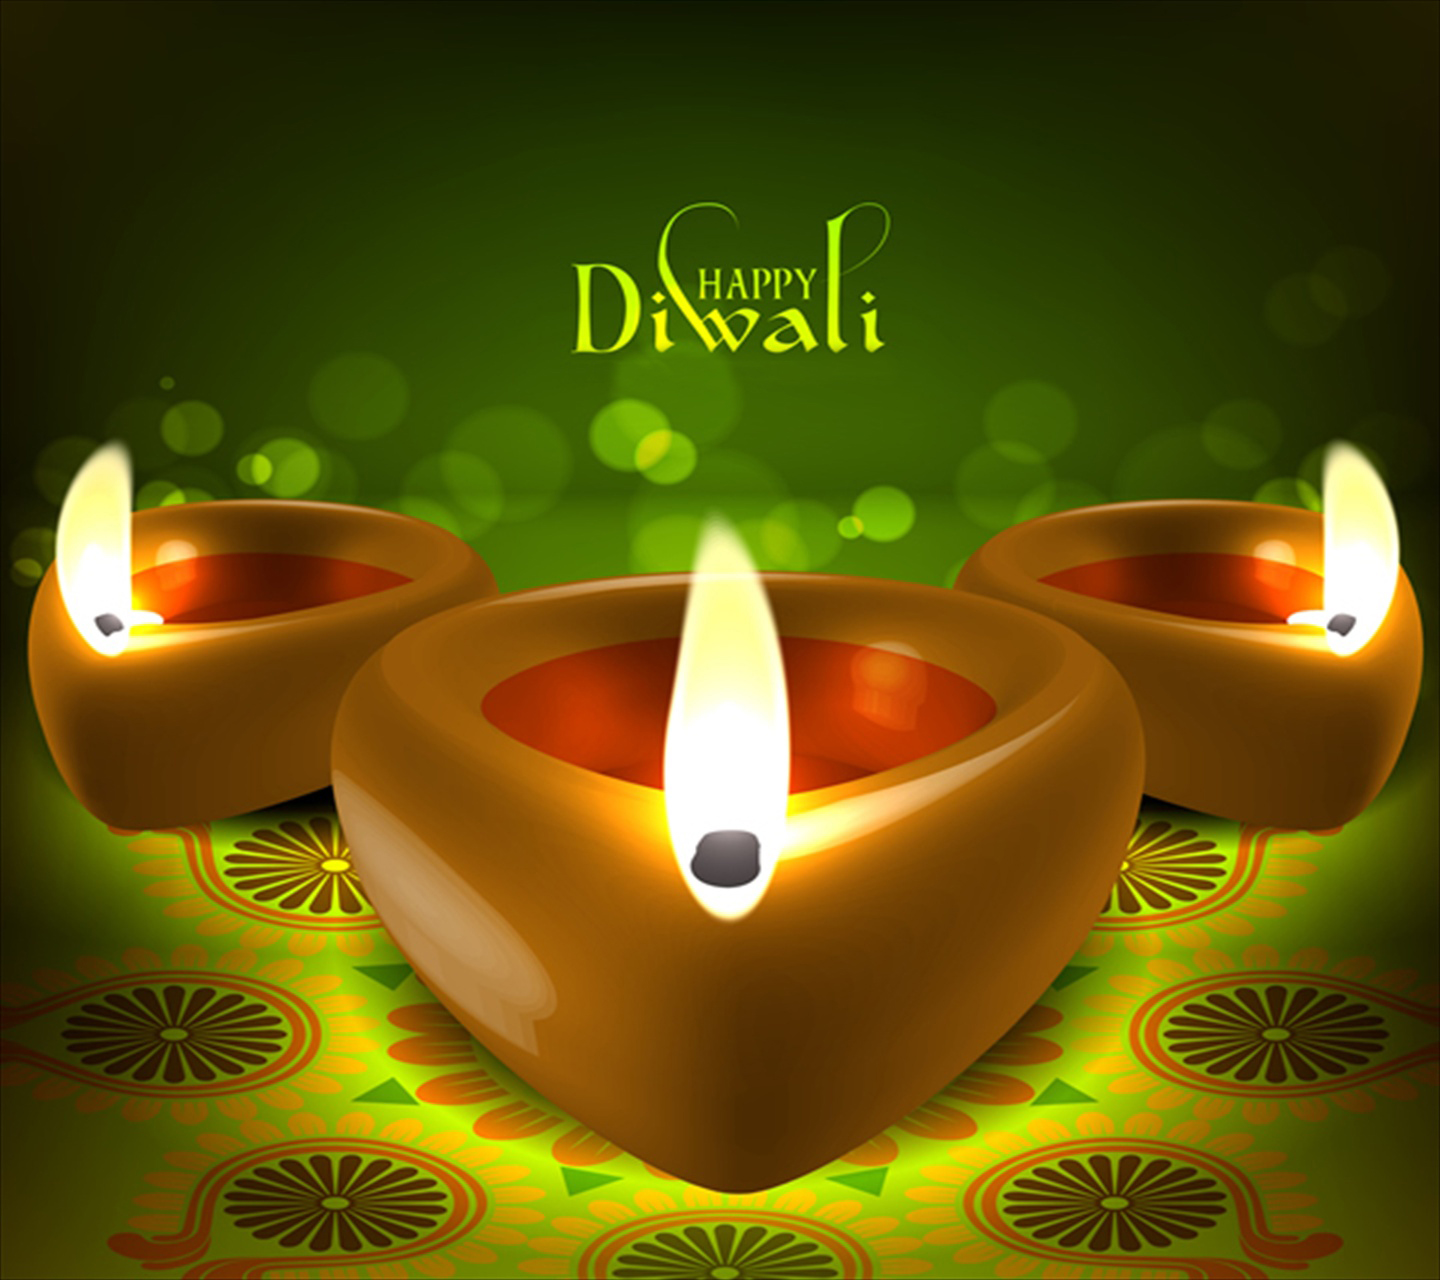 Happy Diwali Wishes Vector Image In High Quality